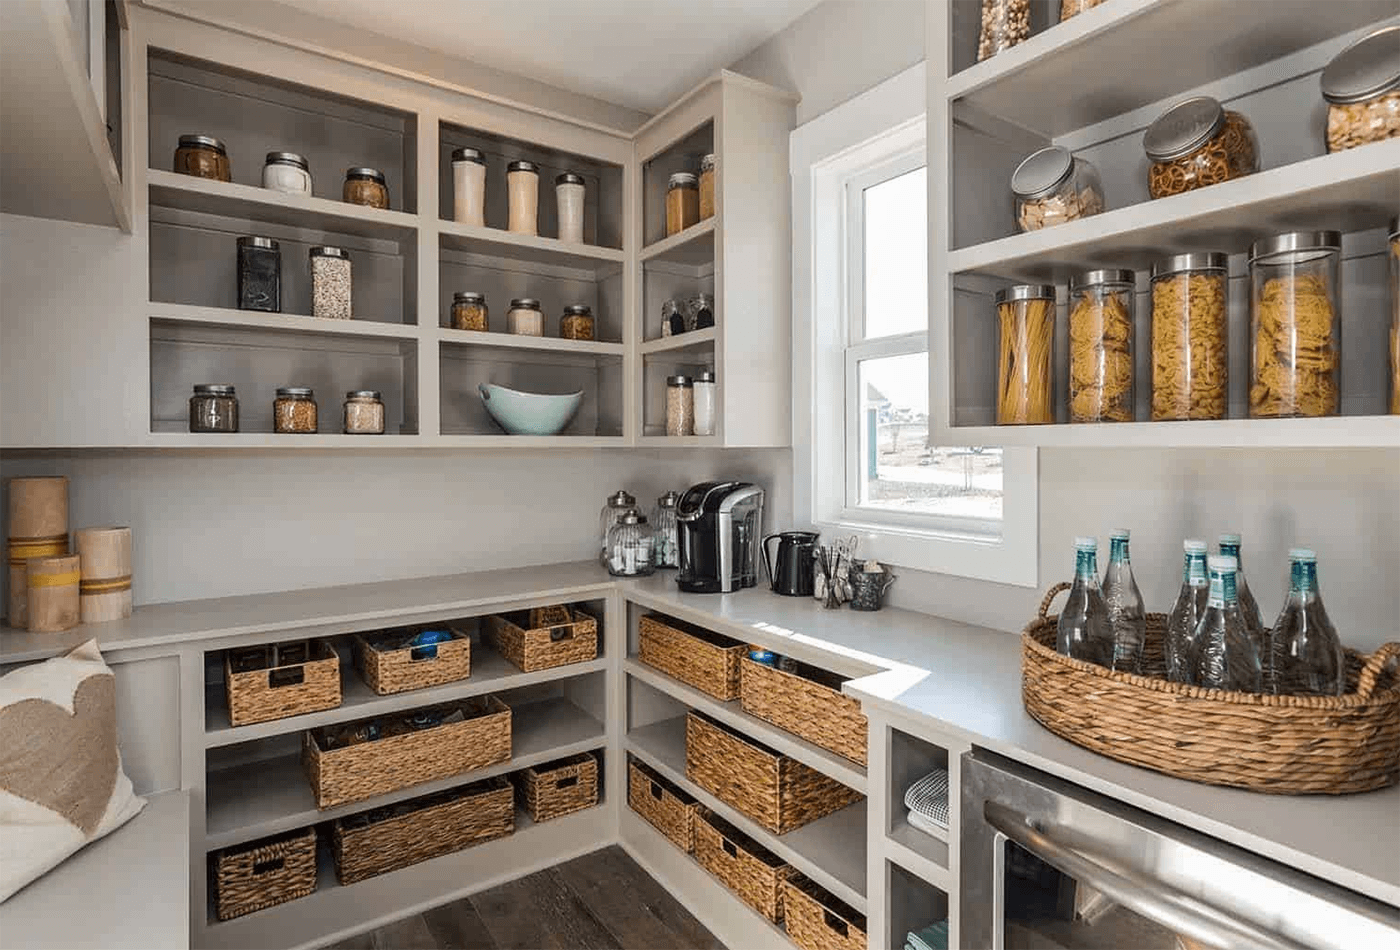 Walk-in pantry ideas: 10 tips for stylish kitchen storage